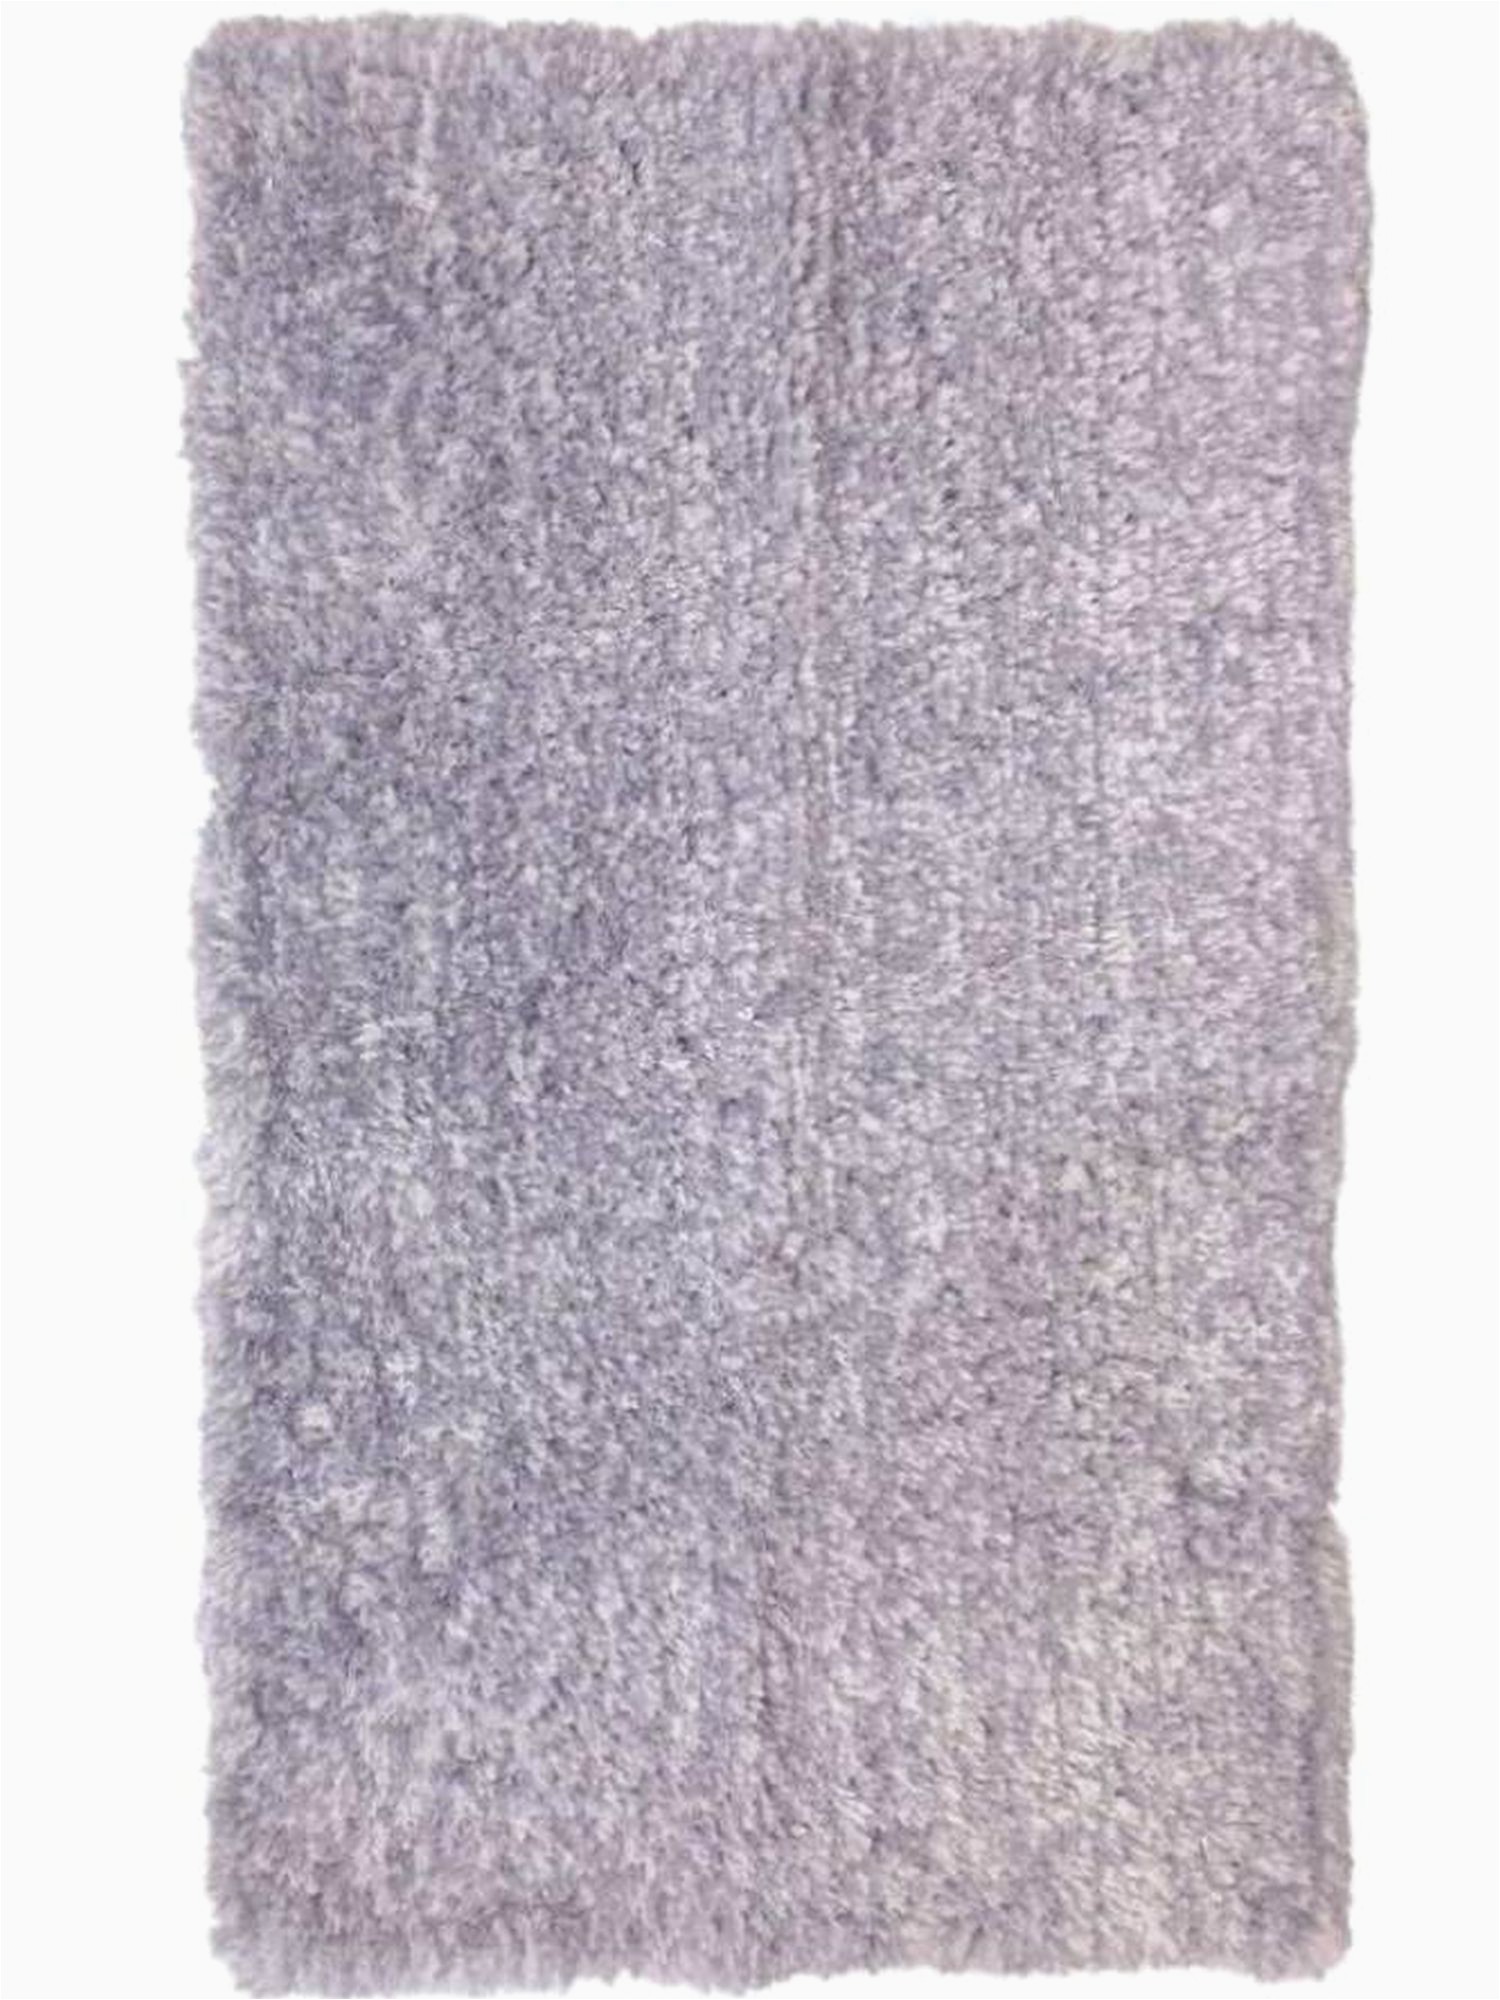 Better Homes and Gardens Heathered Bath Rug Thick and Plush Bath Rugs